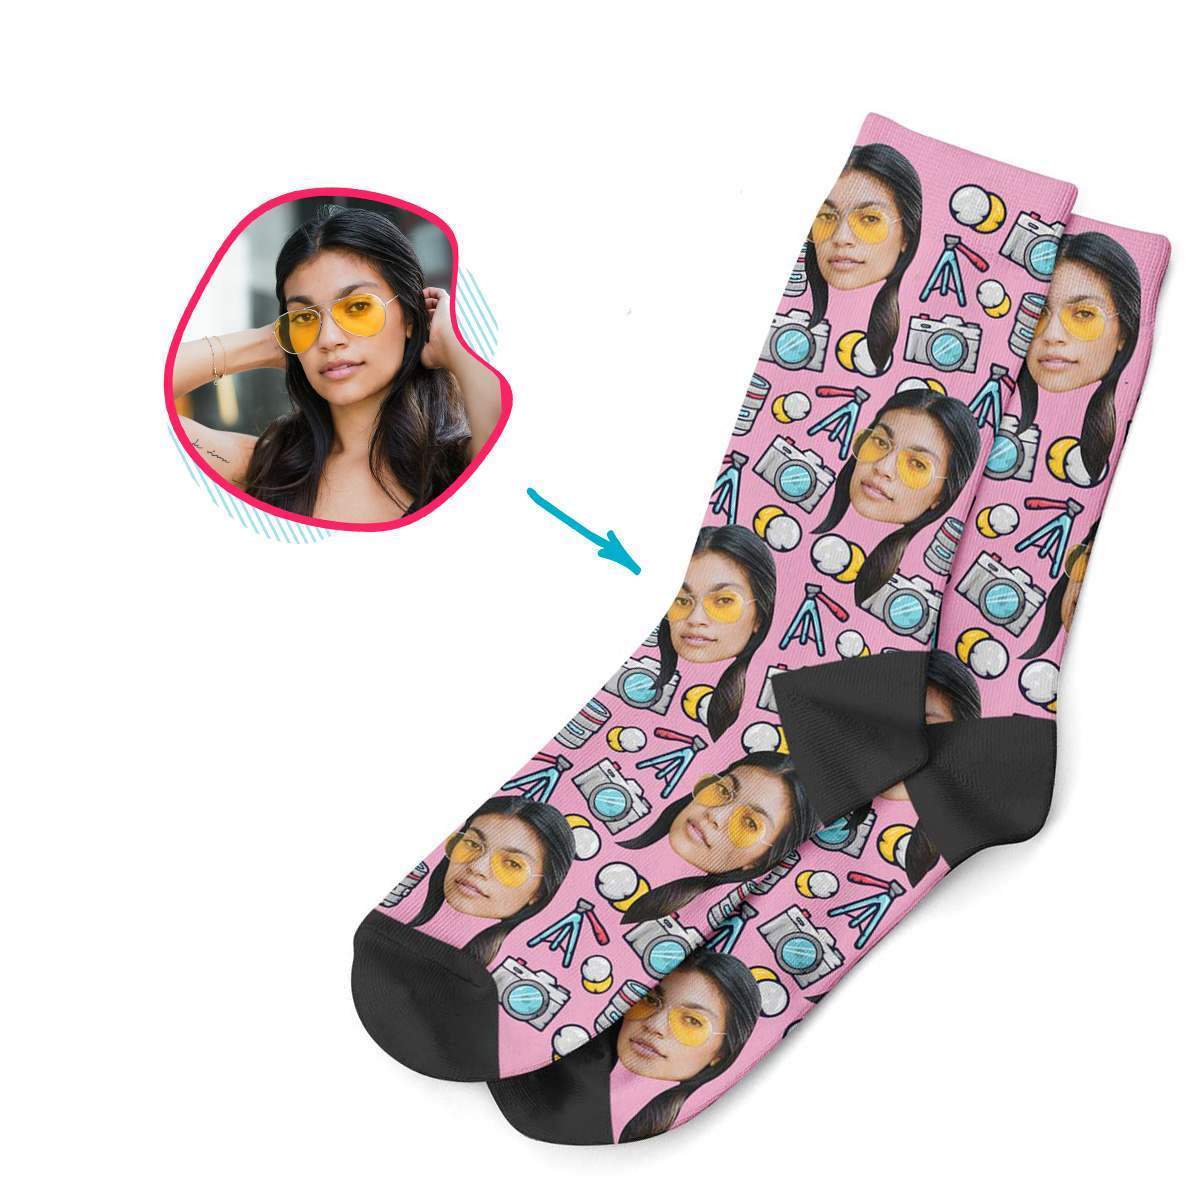 pink Photography socks personalized with photo of face printed on them